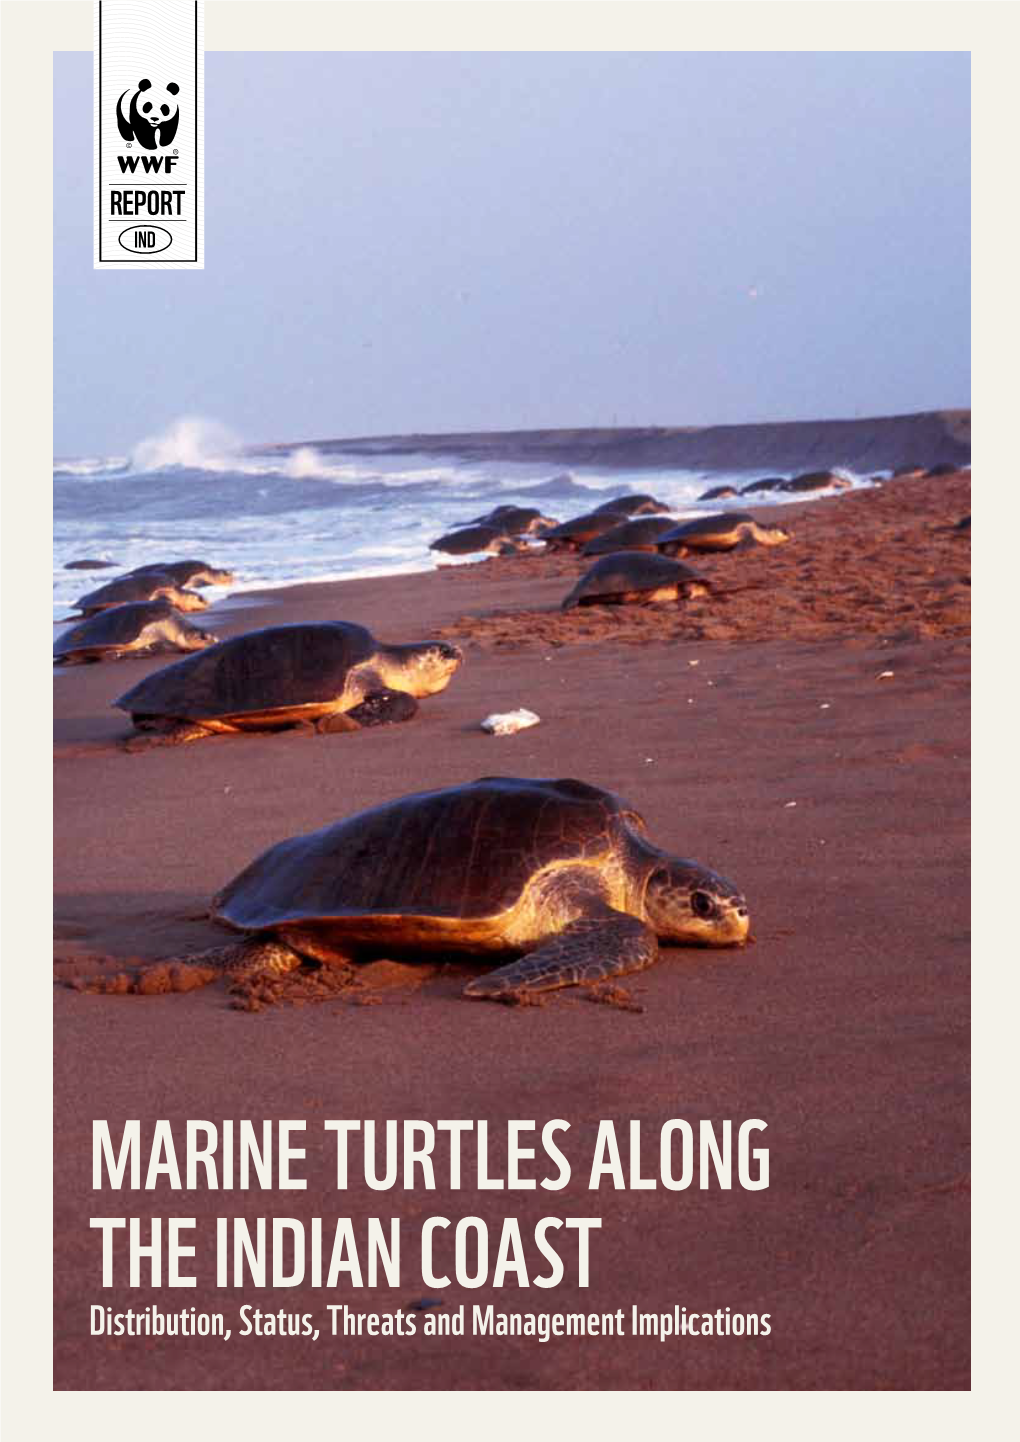 MARINE TURTLES ALONG the INDIAN COAST Distribution, Status, Threats and Management Implications